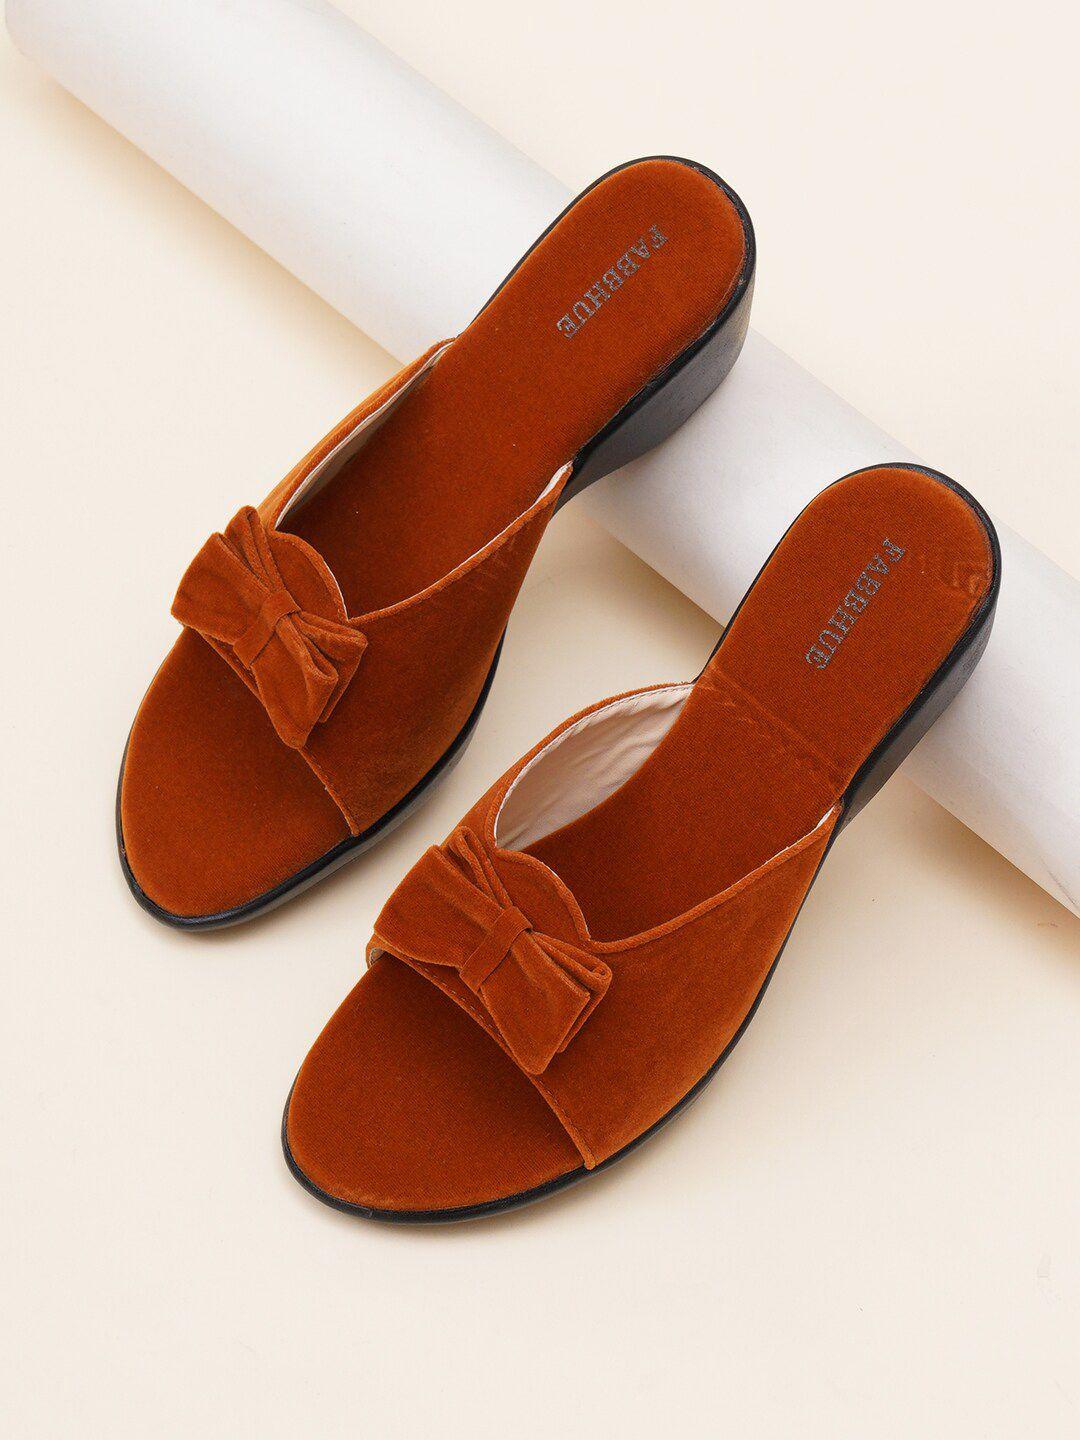 fabbhue suede open toe flats with bows